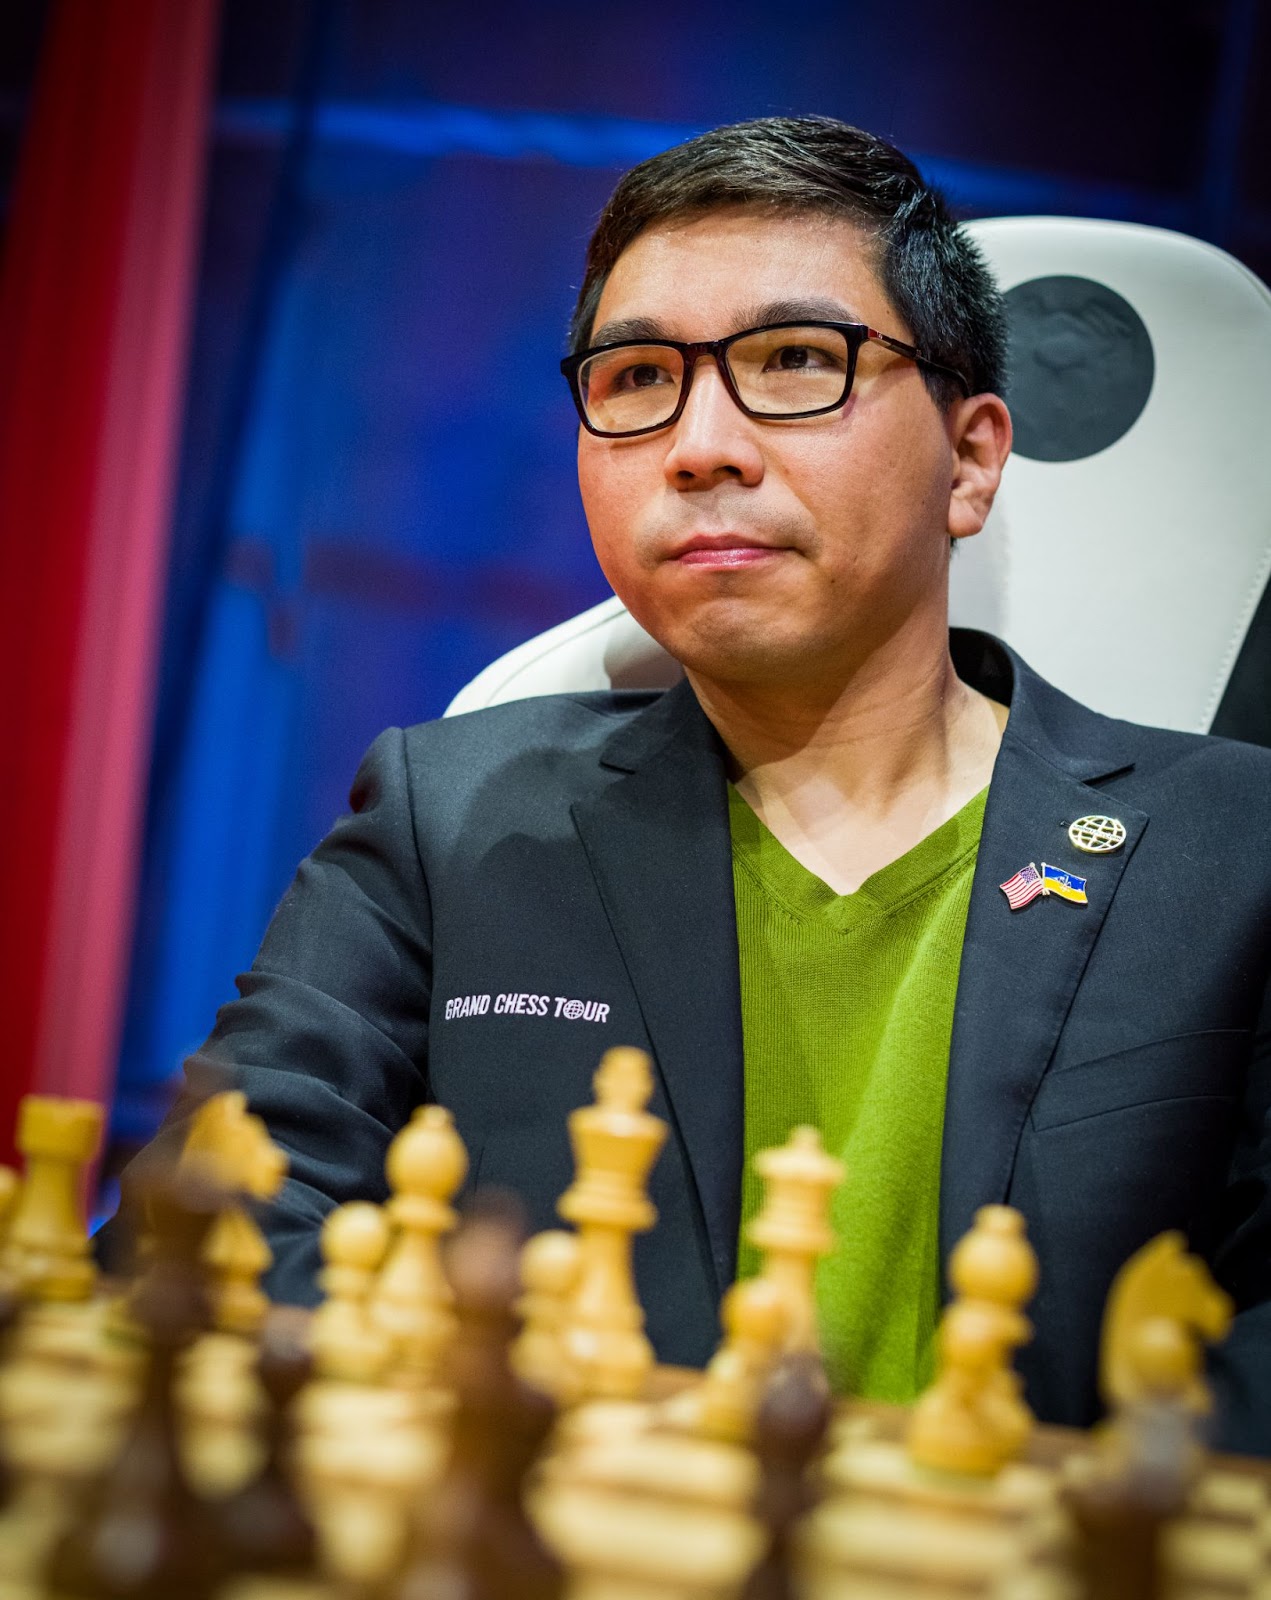 Wesley So rises to World No. 6 FIDE rank after Grand Chess Tour